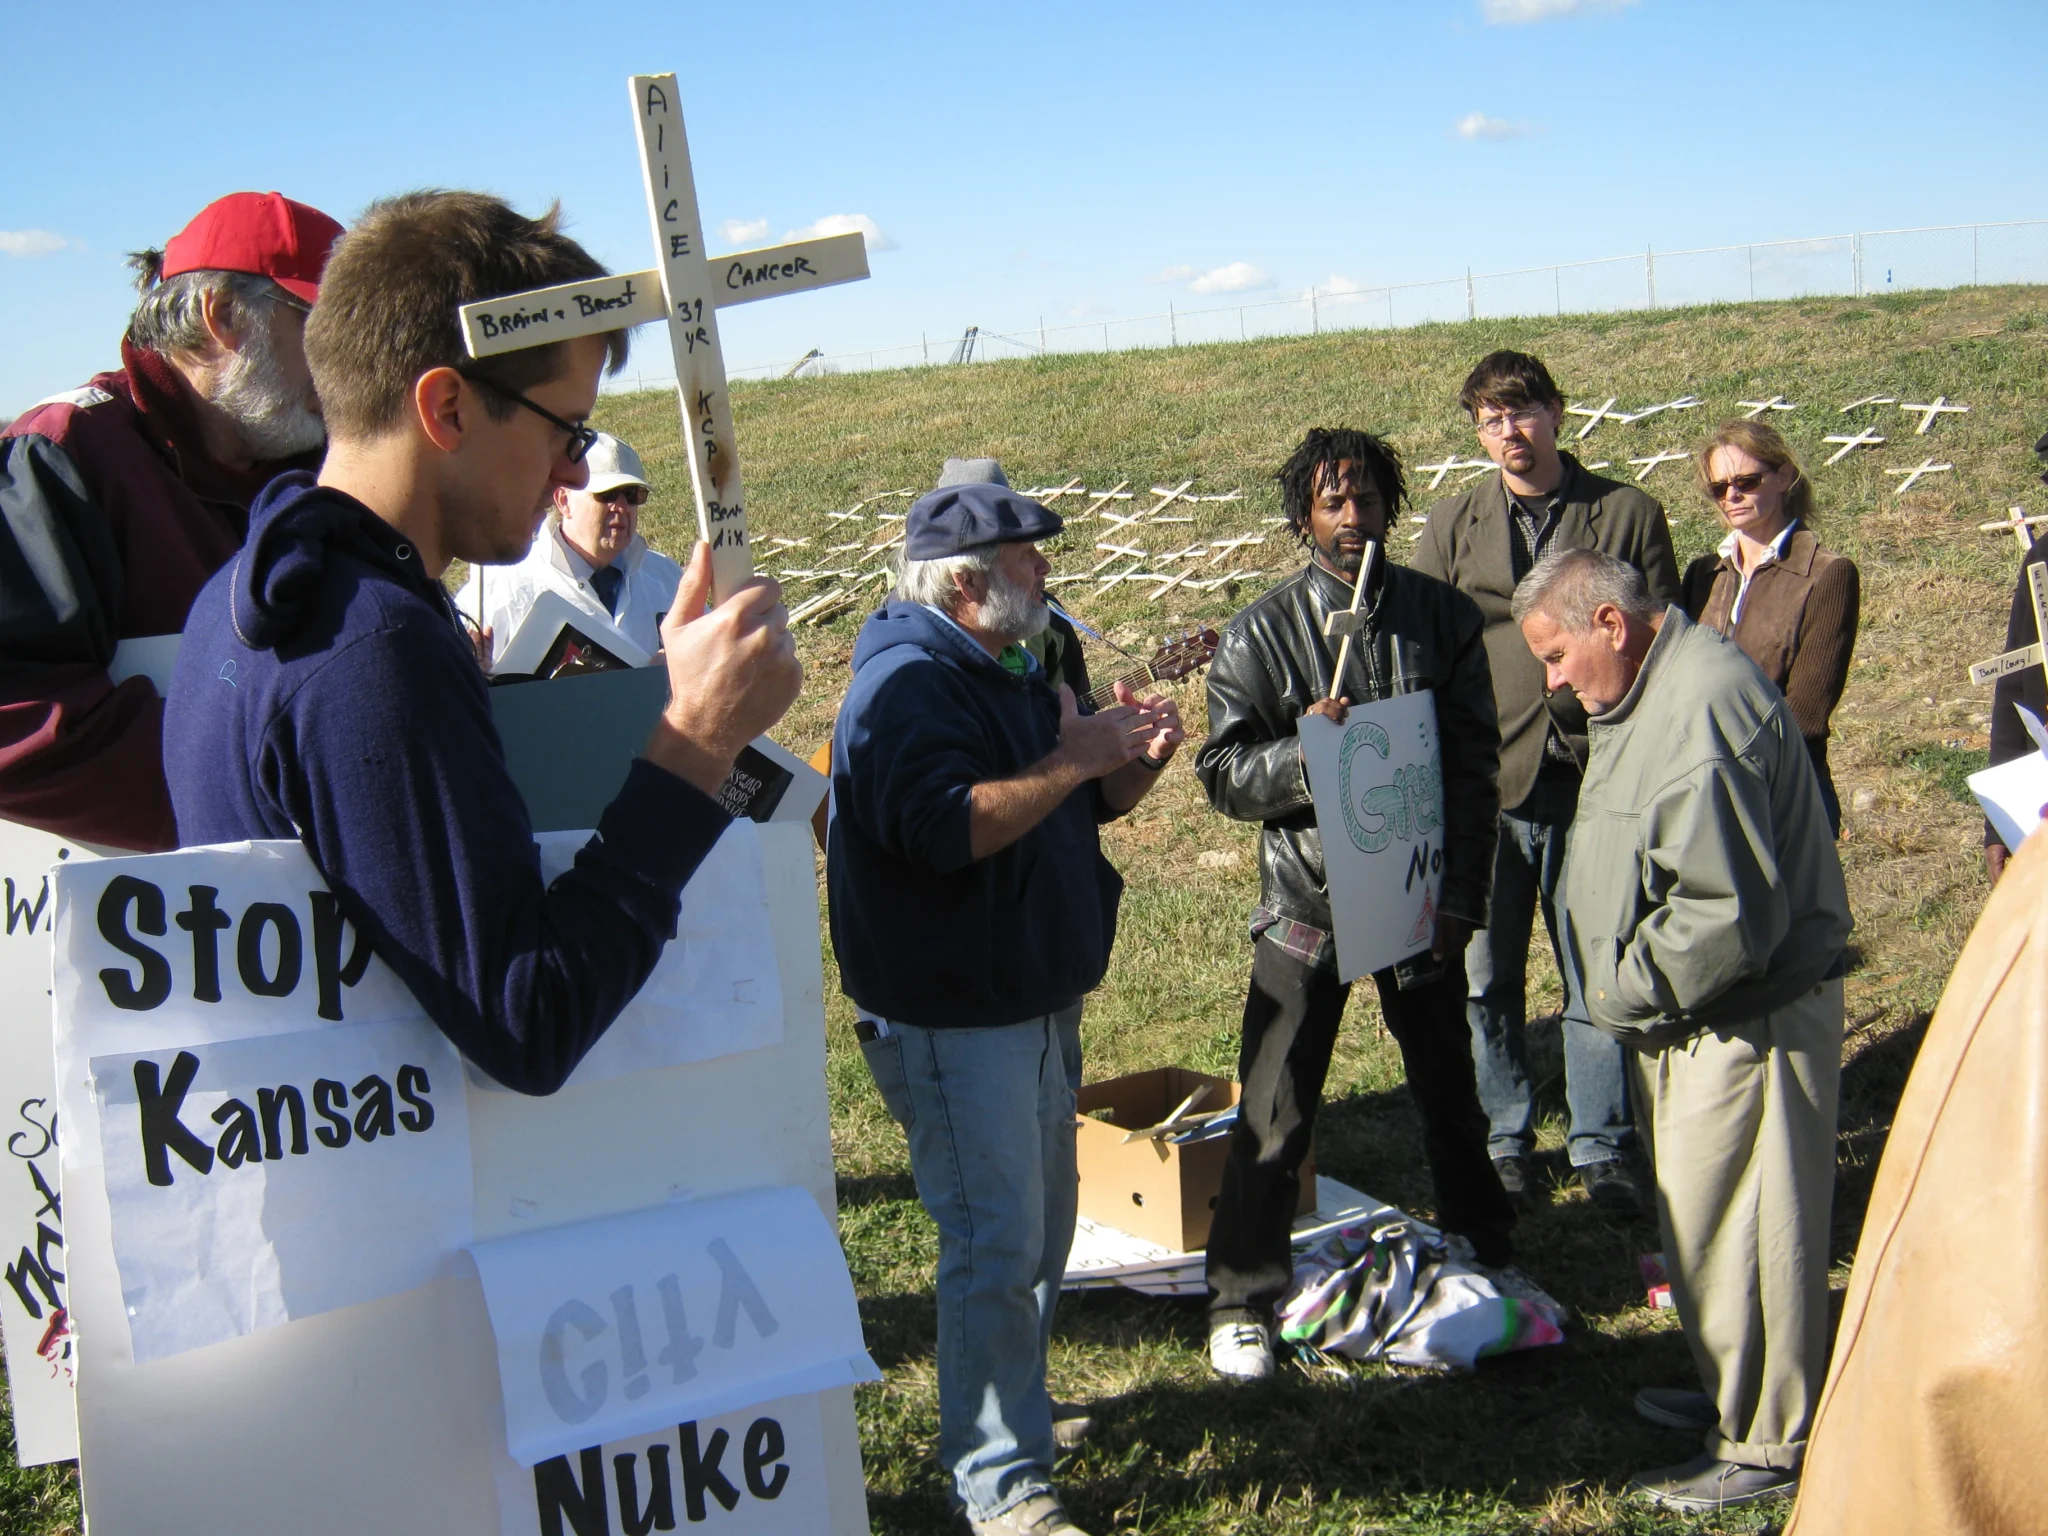 The Midwest Catholic Workers will converge on KC MO for a retreat that culminates in resistance to the KC nuclear weapon plant.